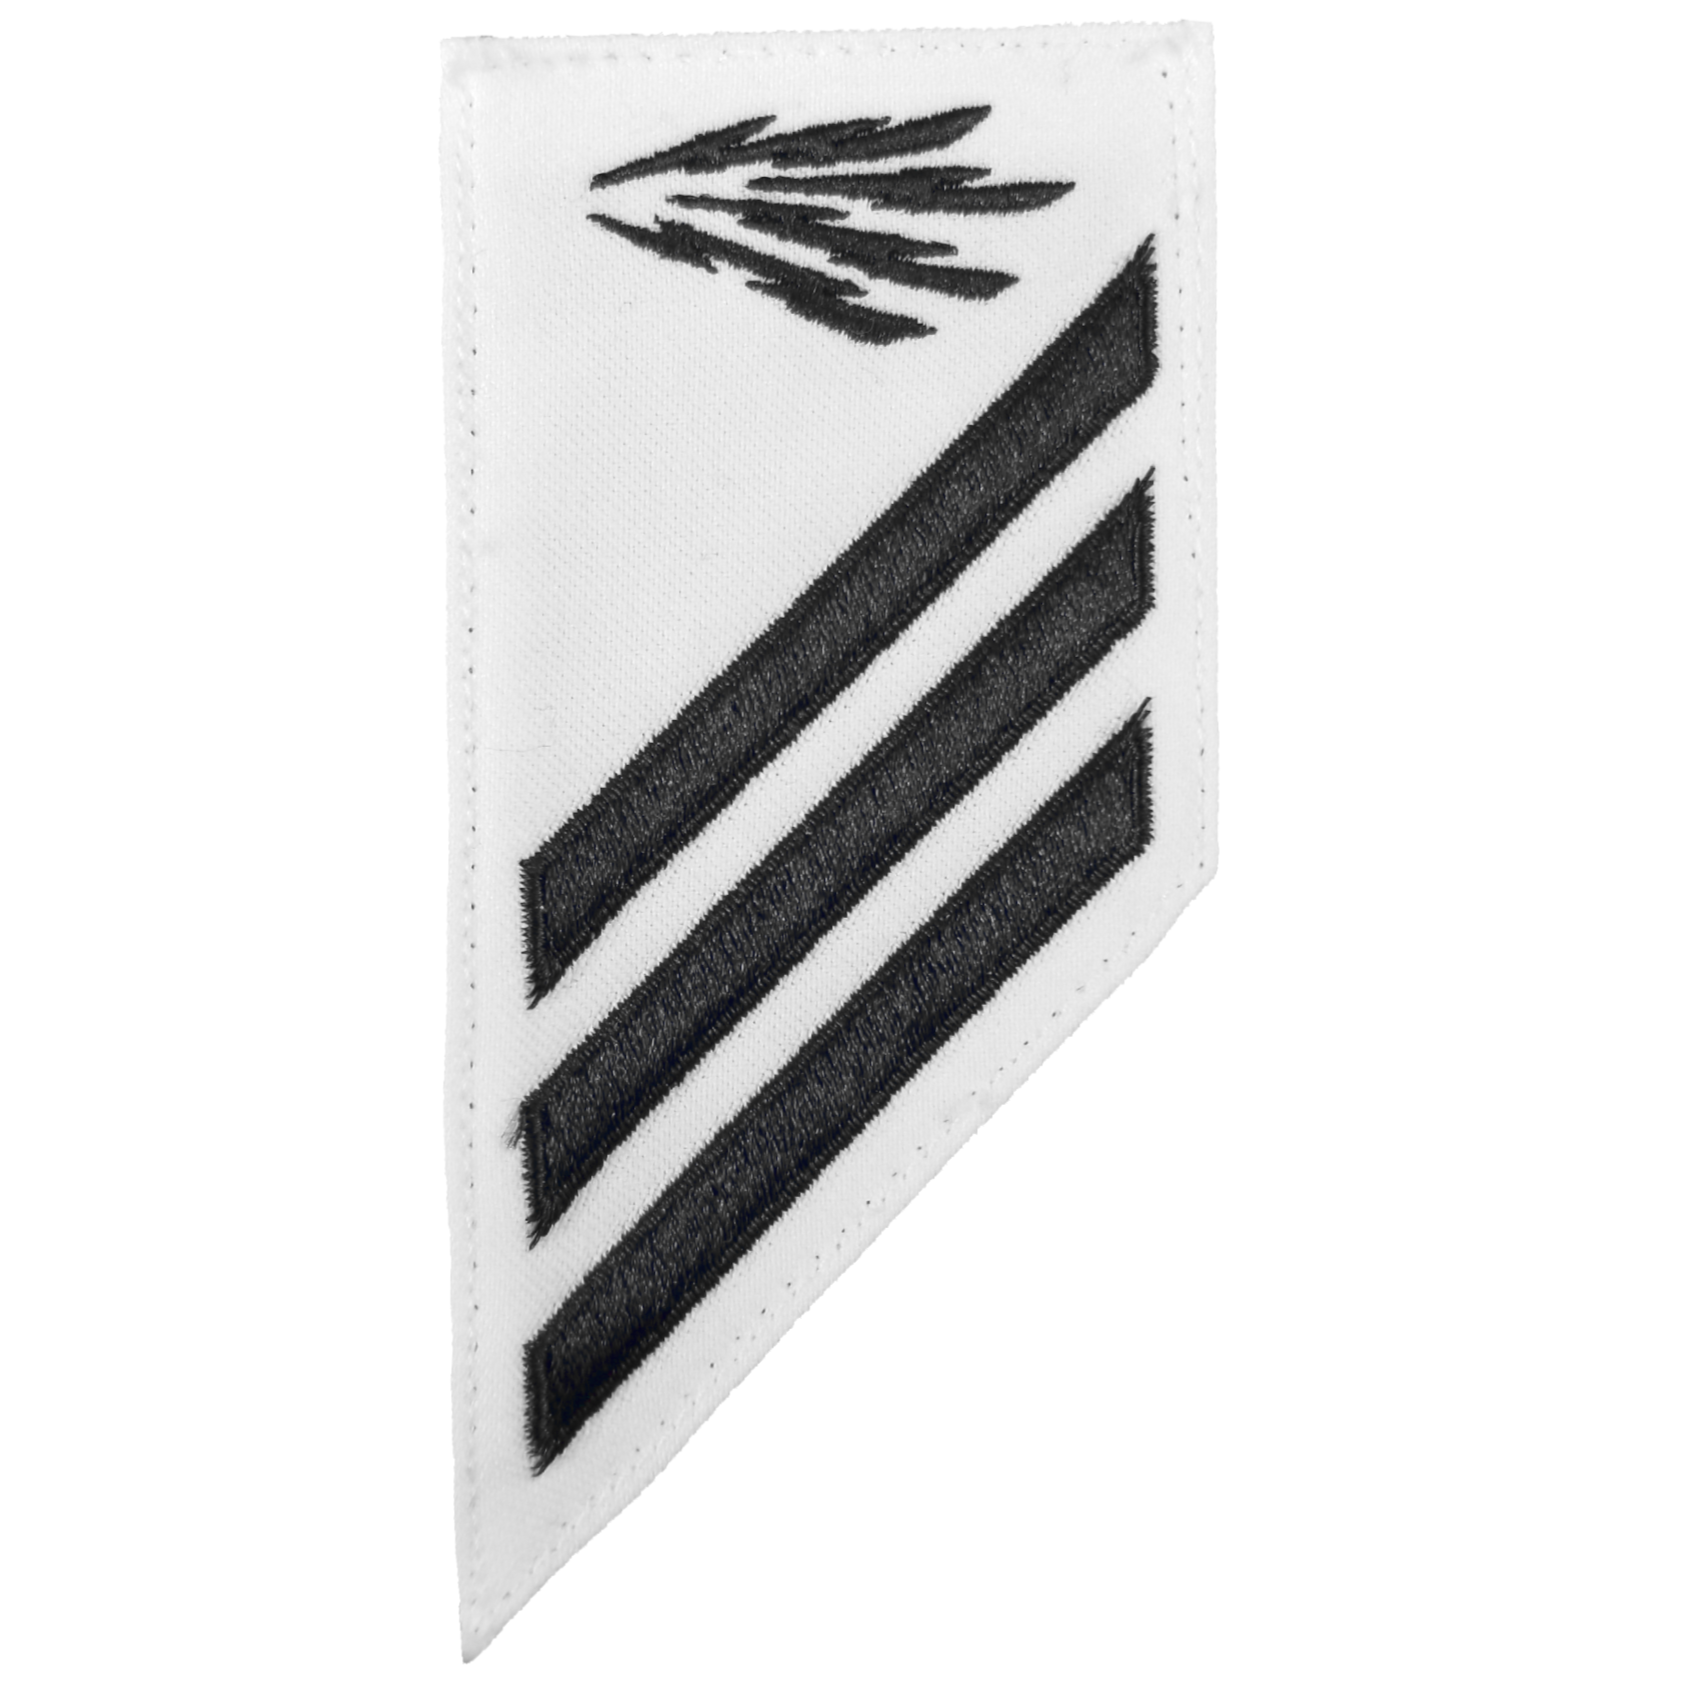 U.S. NAVY INFORMATION SYSTEMS TECHNICIAN (IT) RATING BADGE